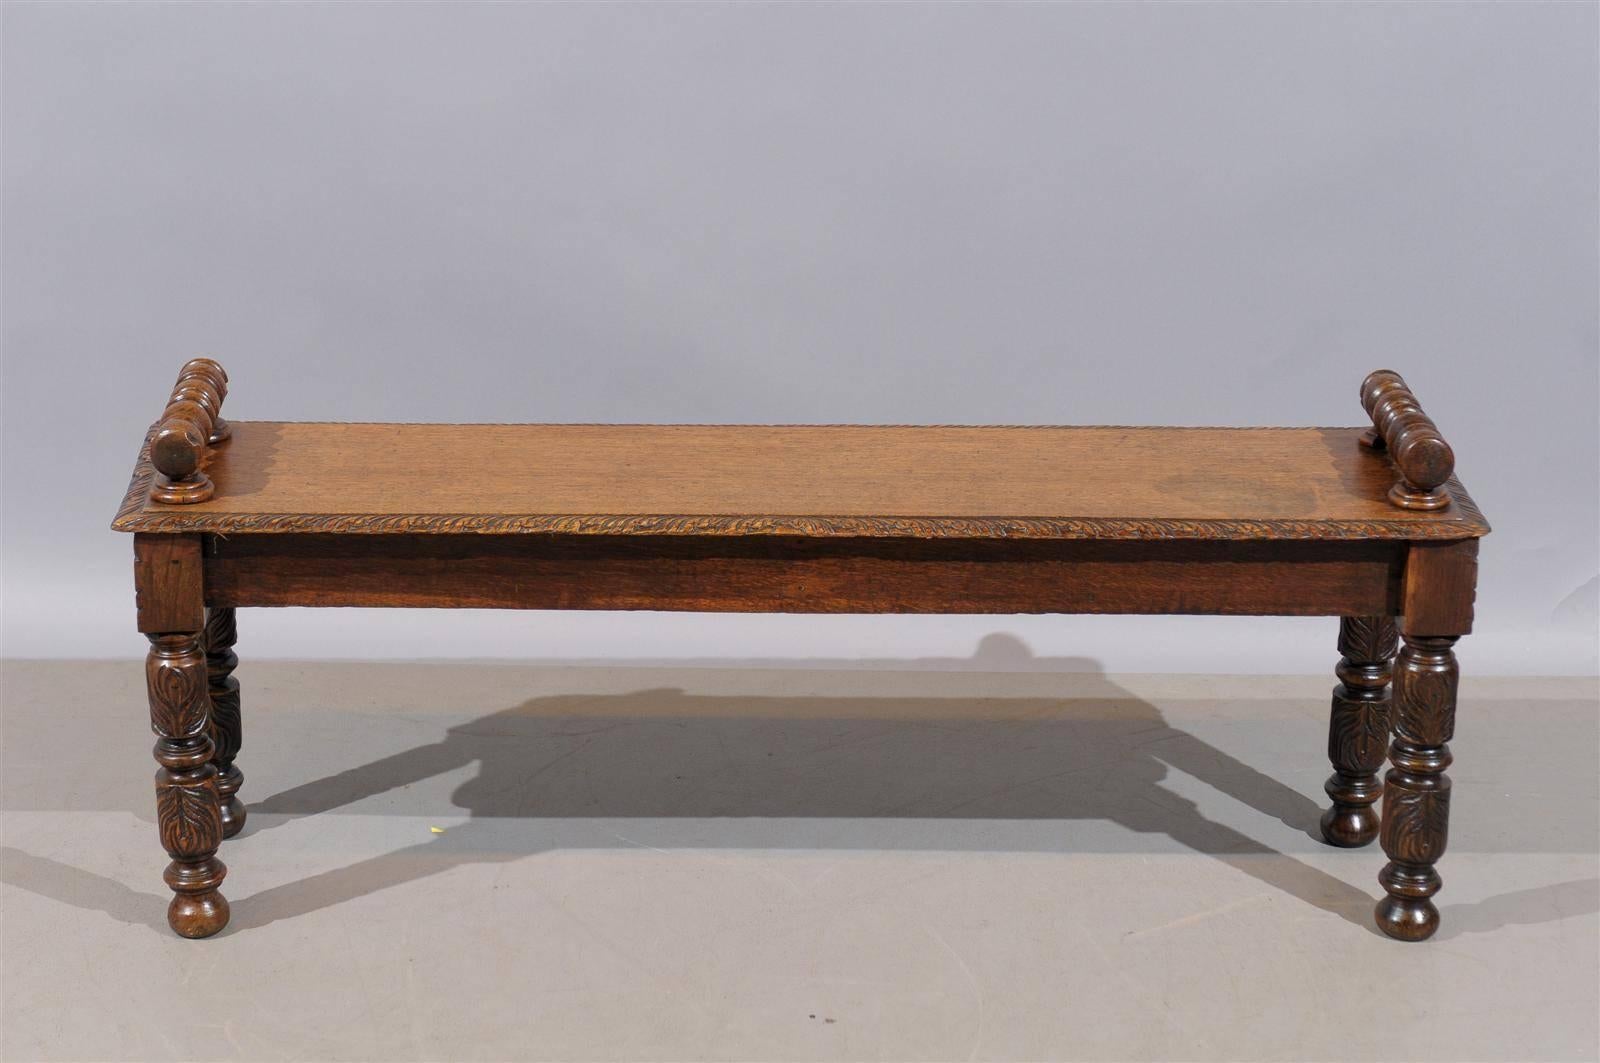 19th Century English Oak Hall Bench with Handles and Carved Decoration, circa 1890